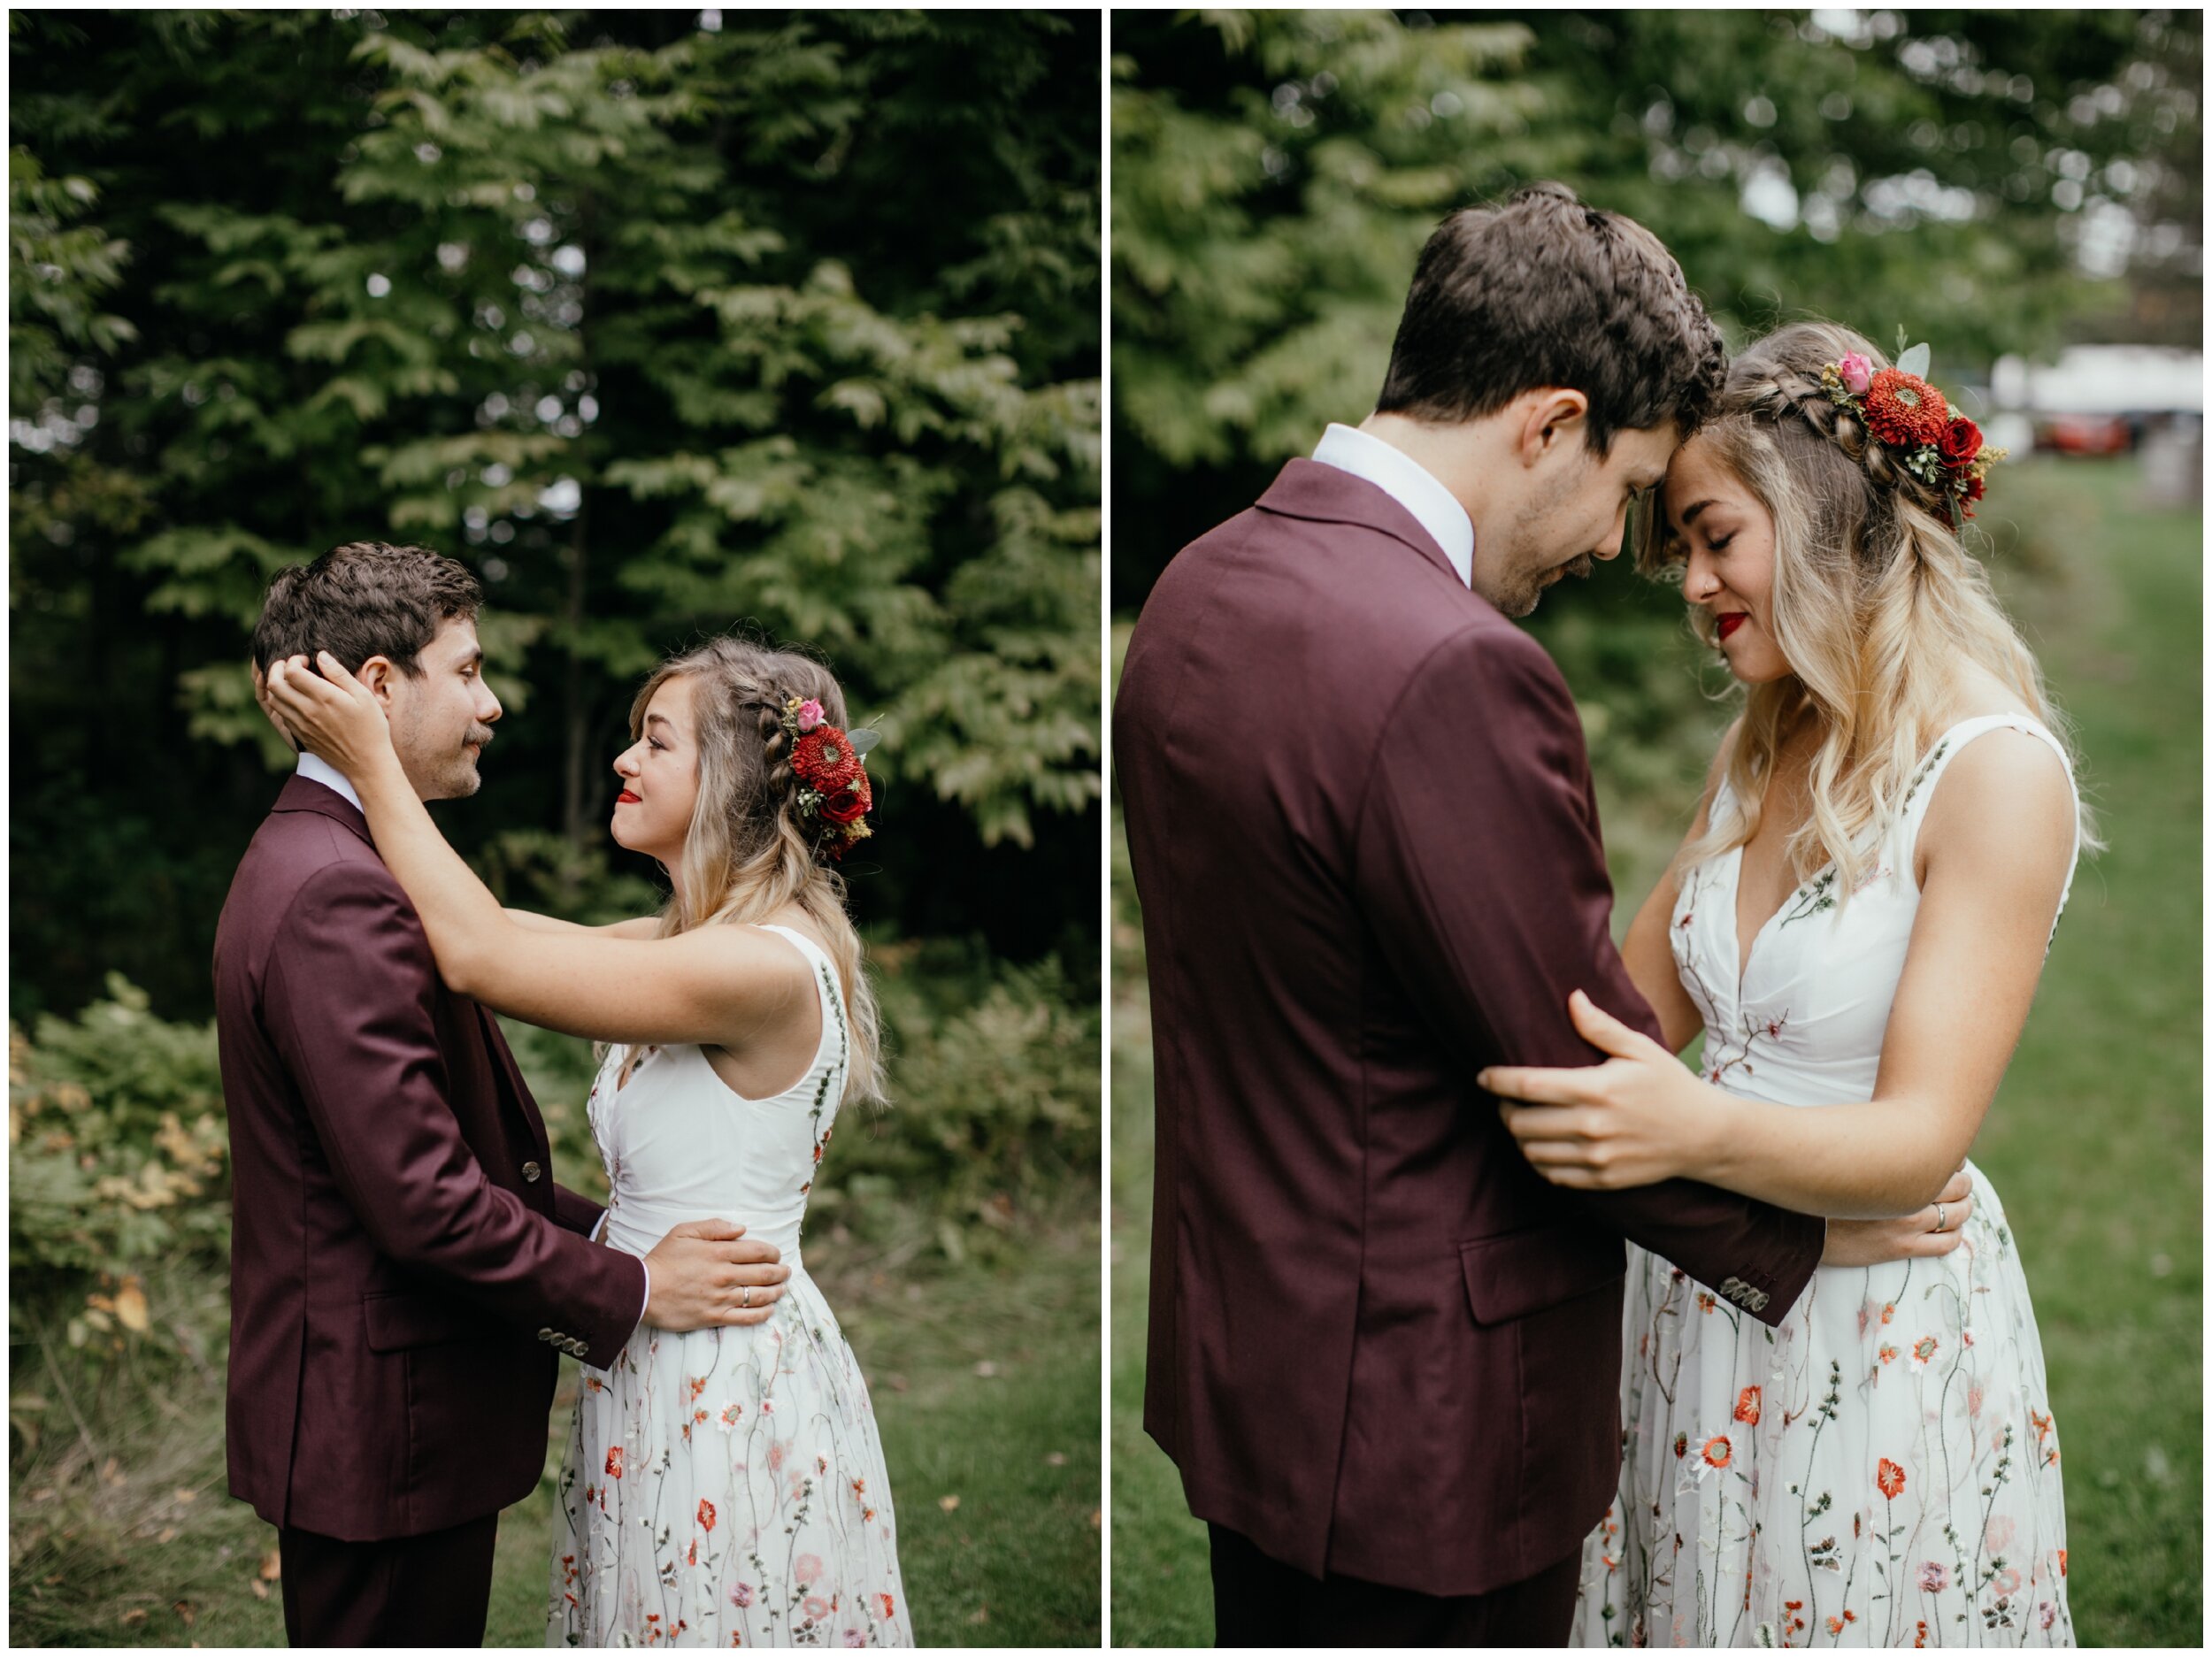 Bride and groom embracing during first look at Minnesota summer camp wedding